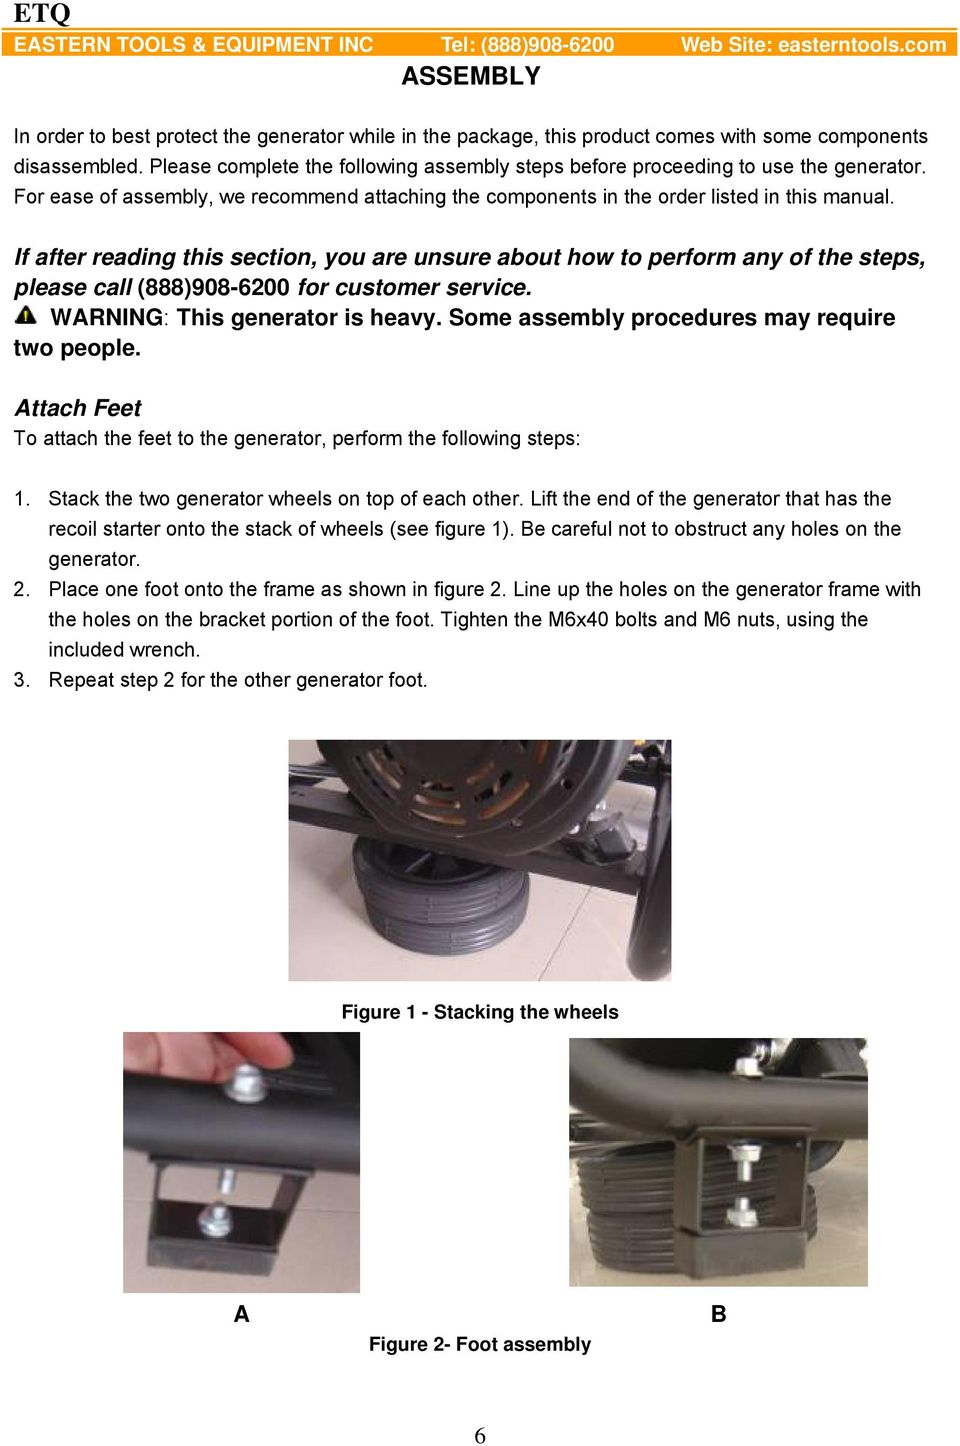 If after reading this section, you are unsure about how to perform any of the steps, please call (888)908-6200 for customer service. WARNING: This generator is heavy.